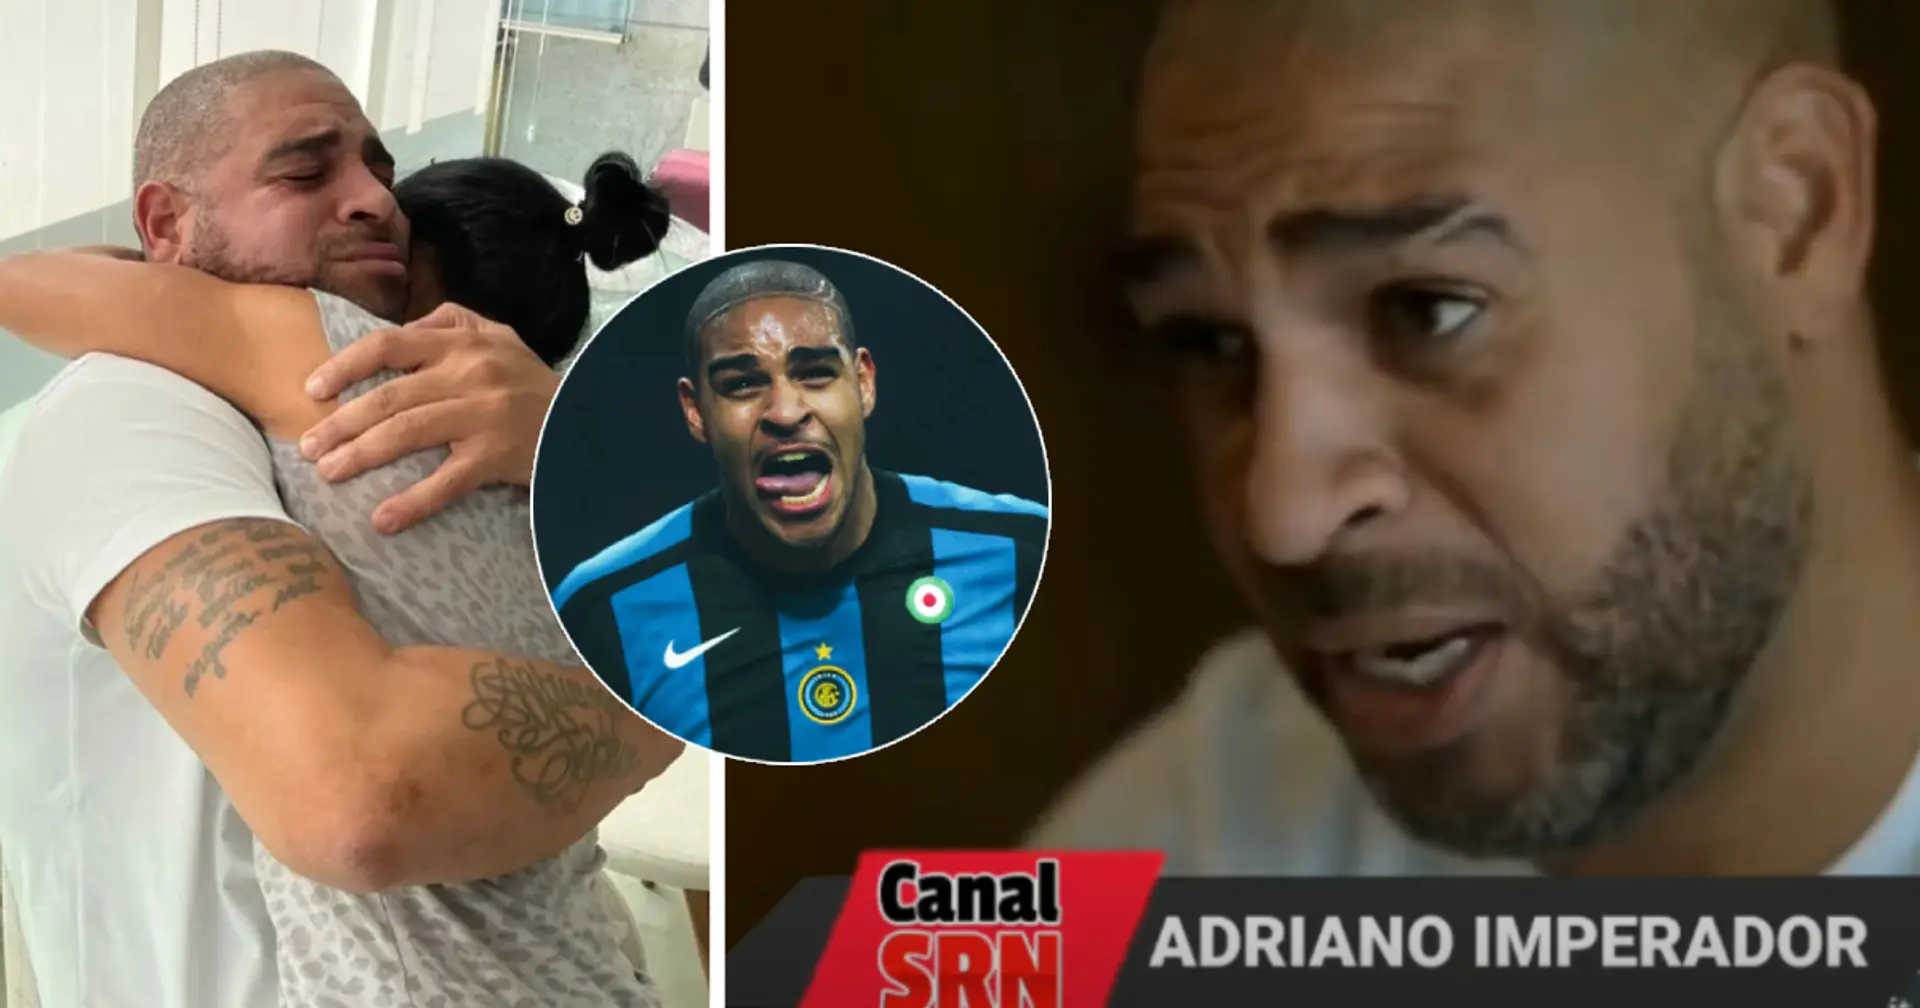 'Only I know how much I suffered'. What really happened to Brazil icon Adriano